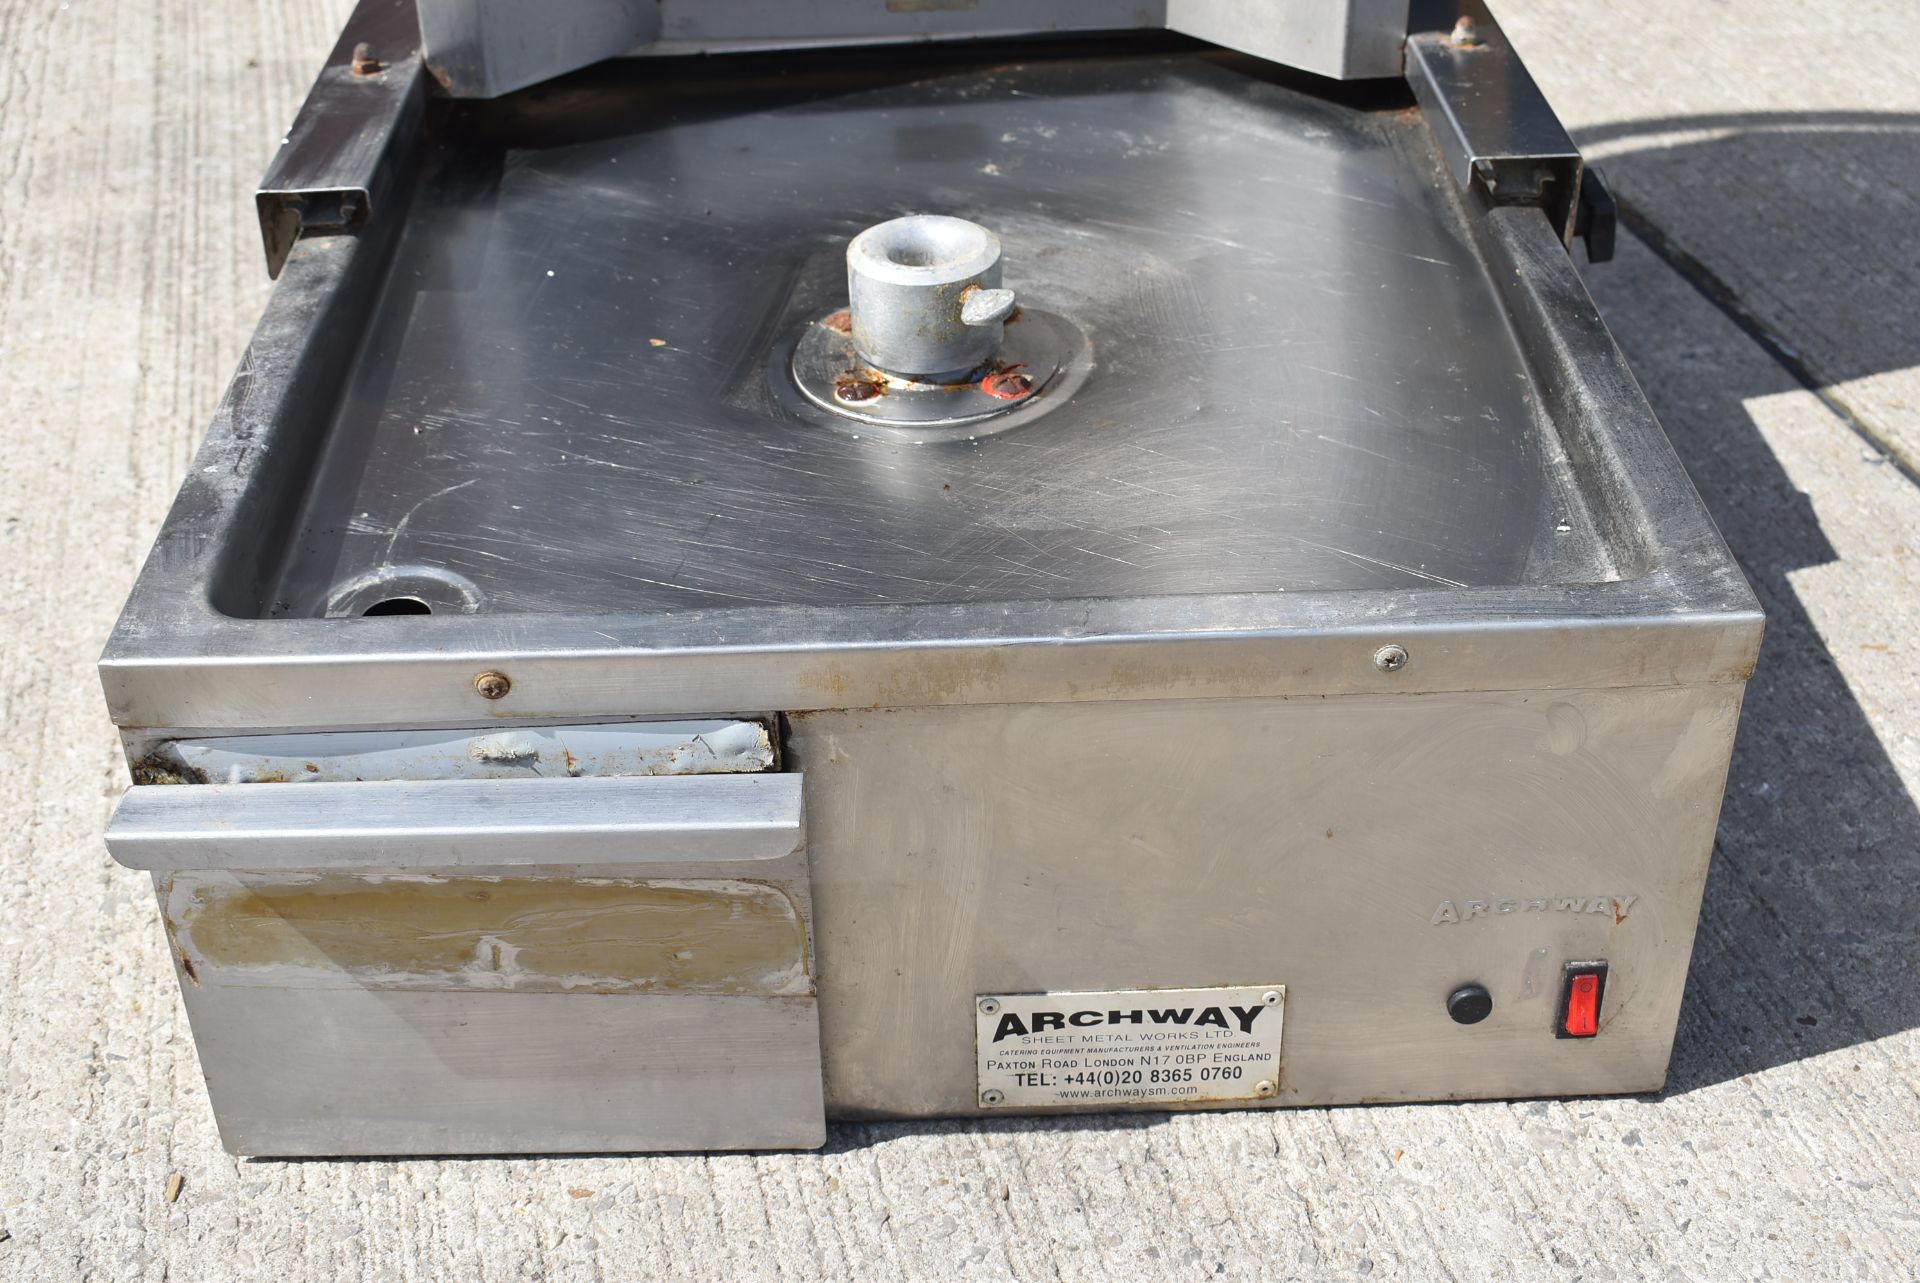 1 x Archway 4BSTD 4 Burner Doner Kebab Grill - Gas Fired - RRP £580 - Dimensions: H110 x W56 x D65 - Image 3 of 7